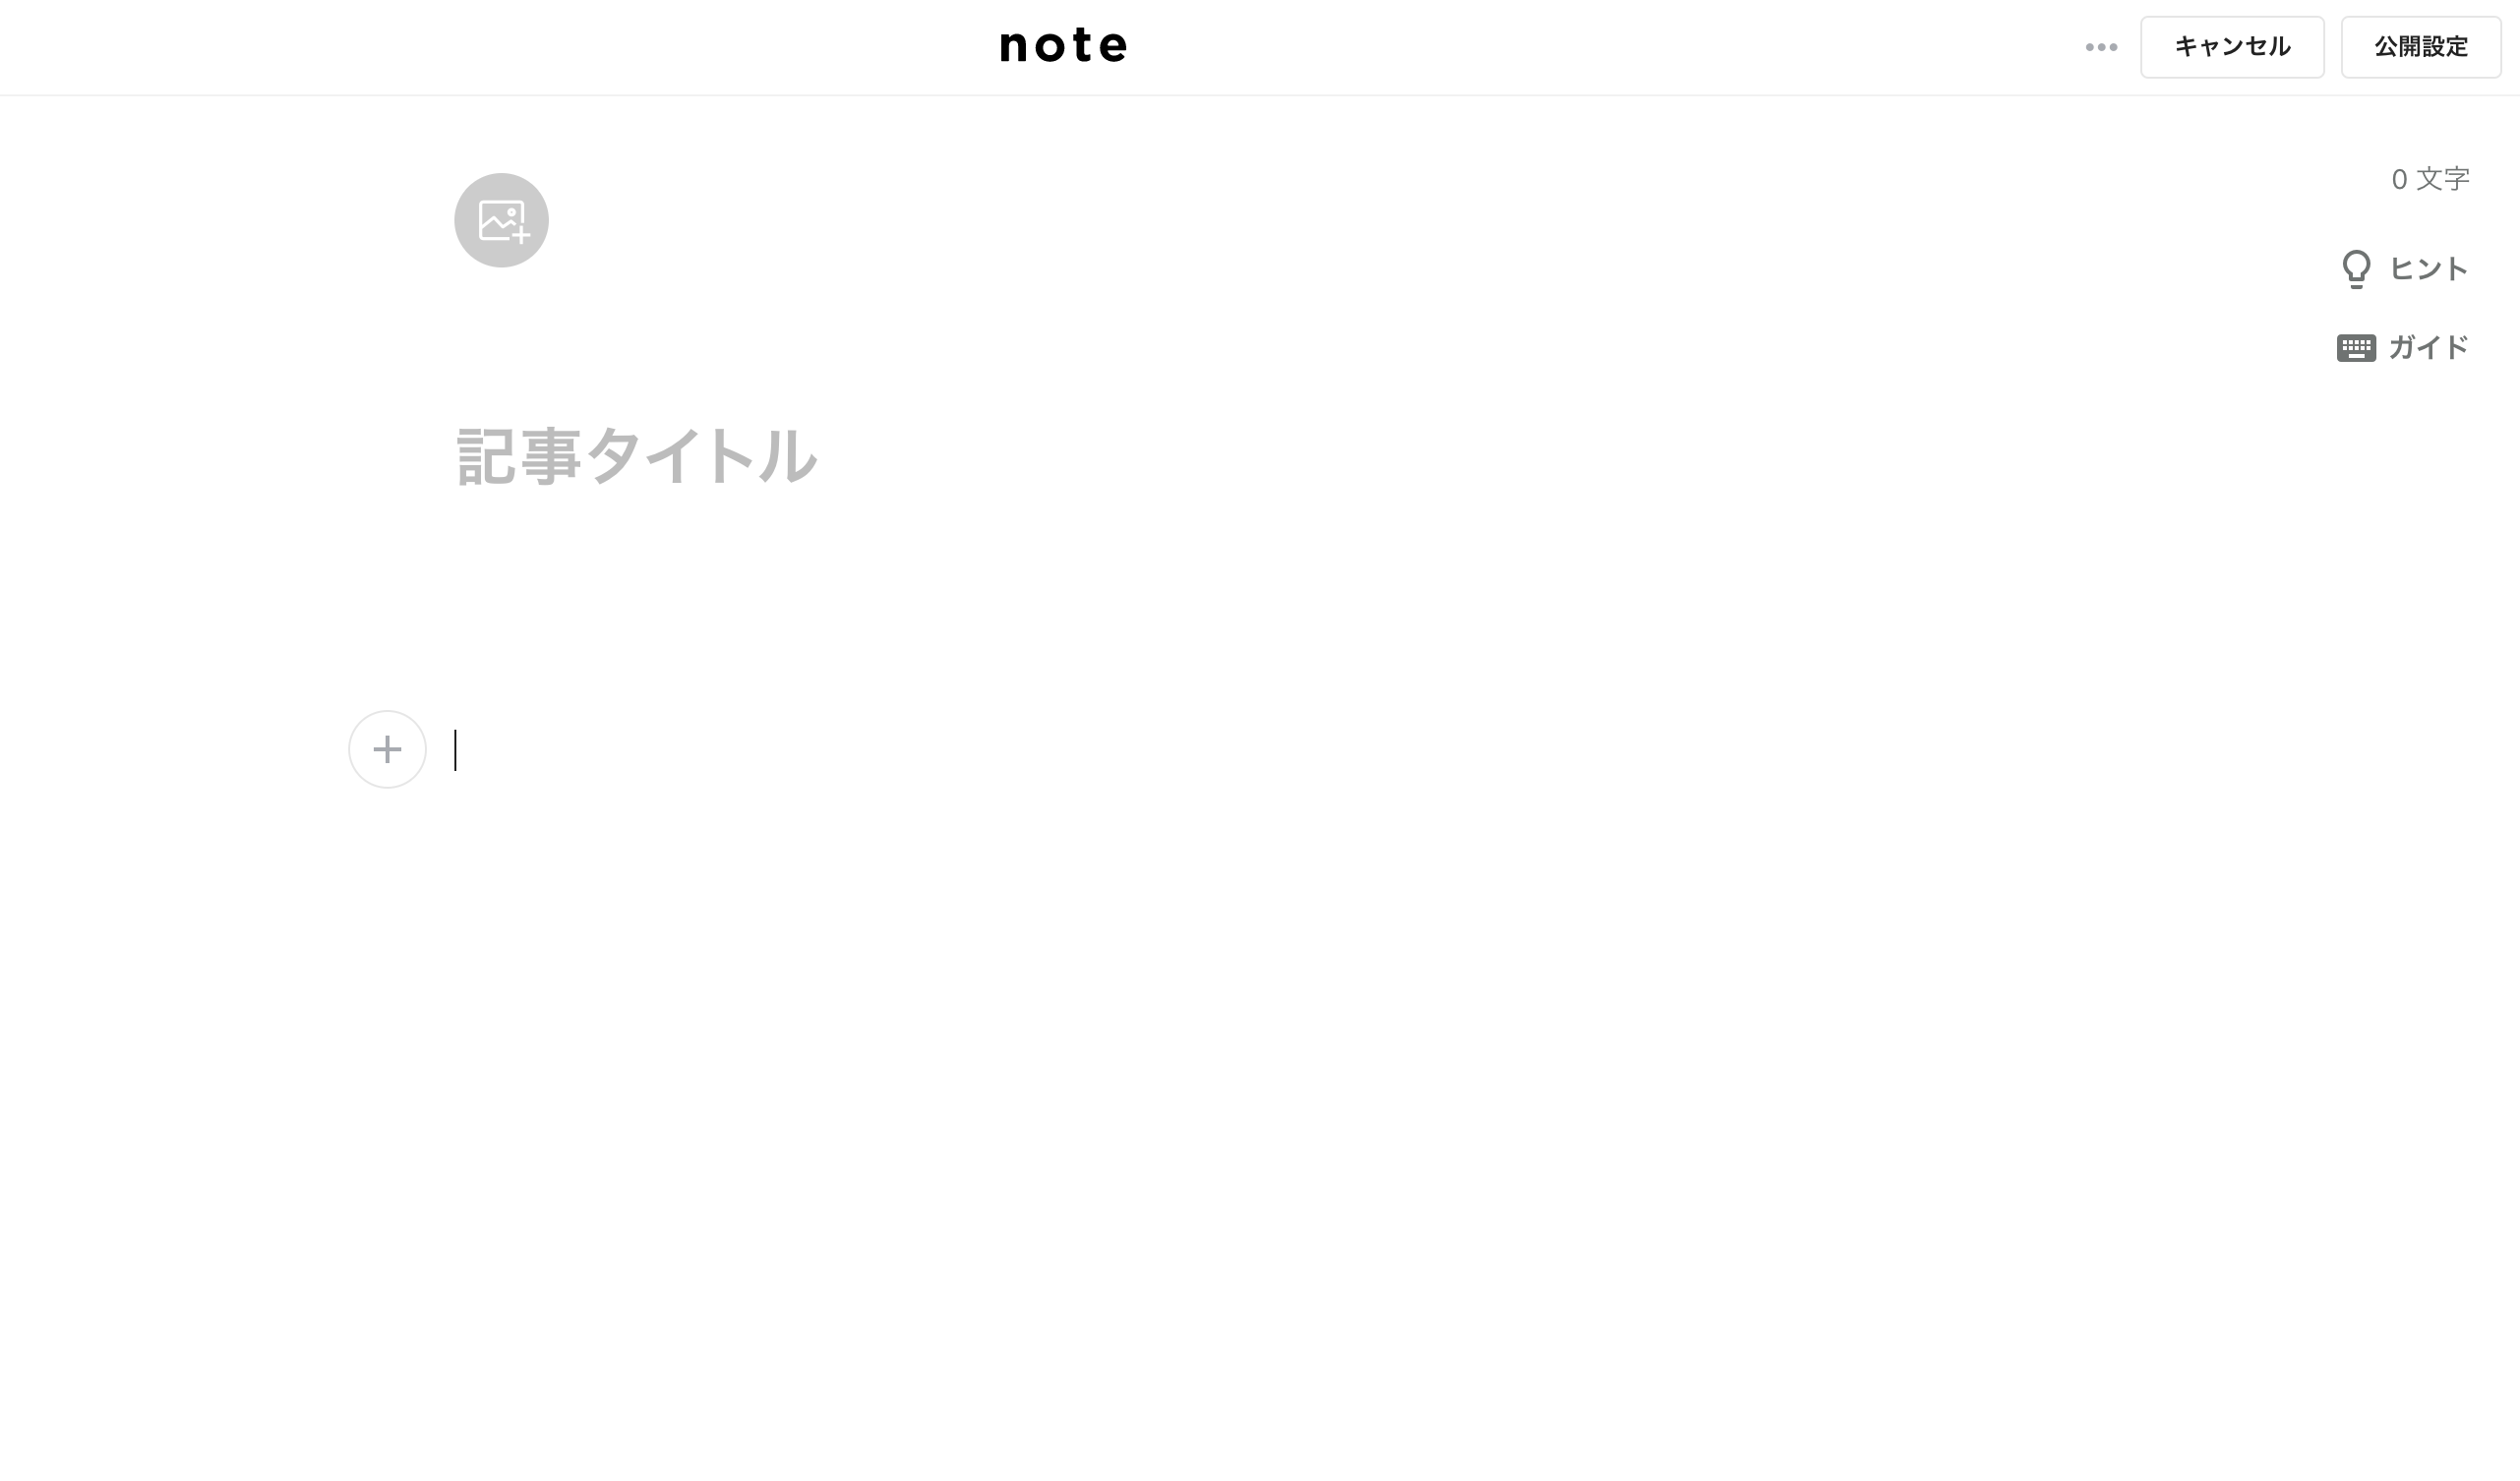 noteのエディタ